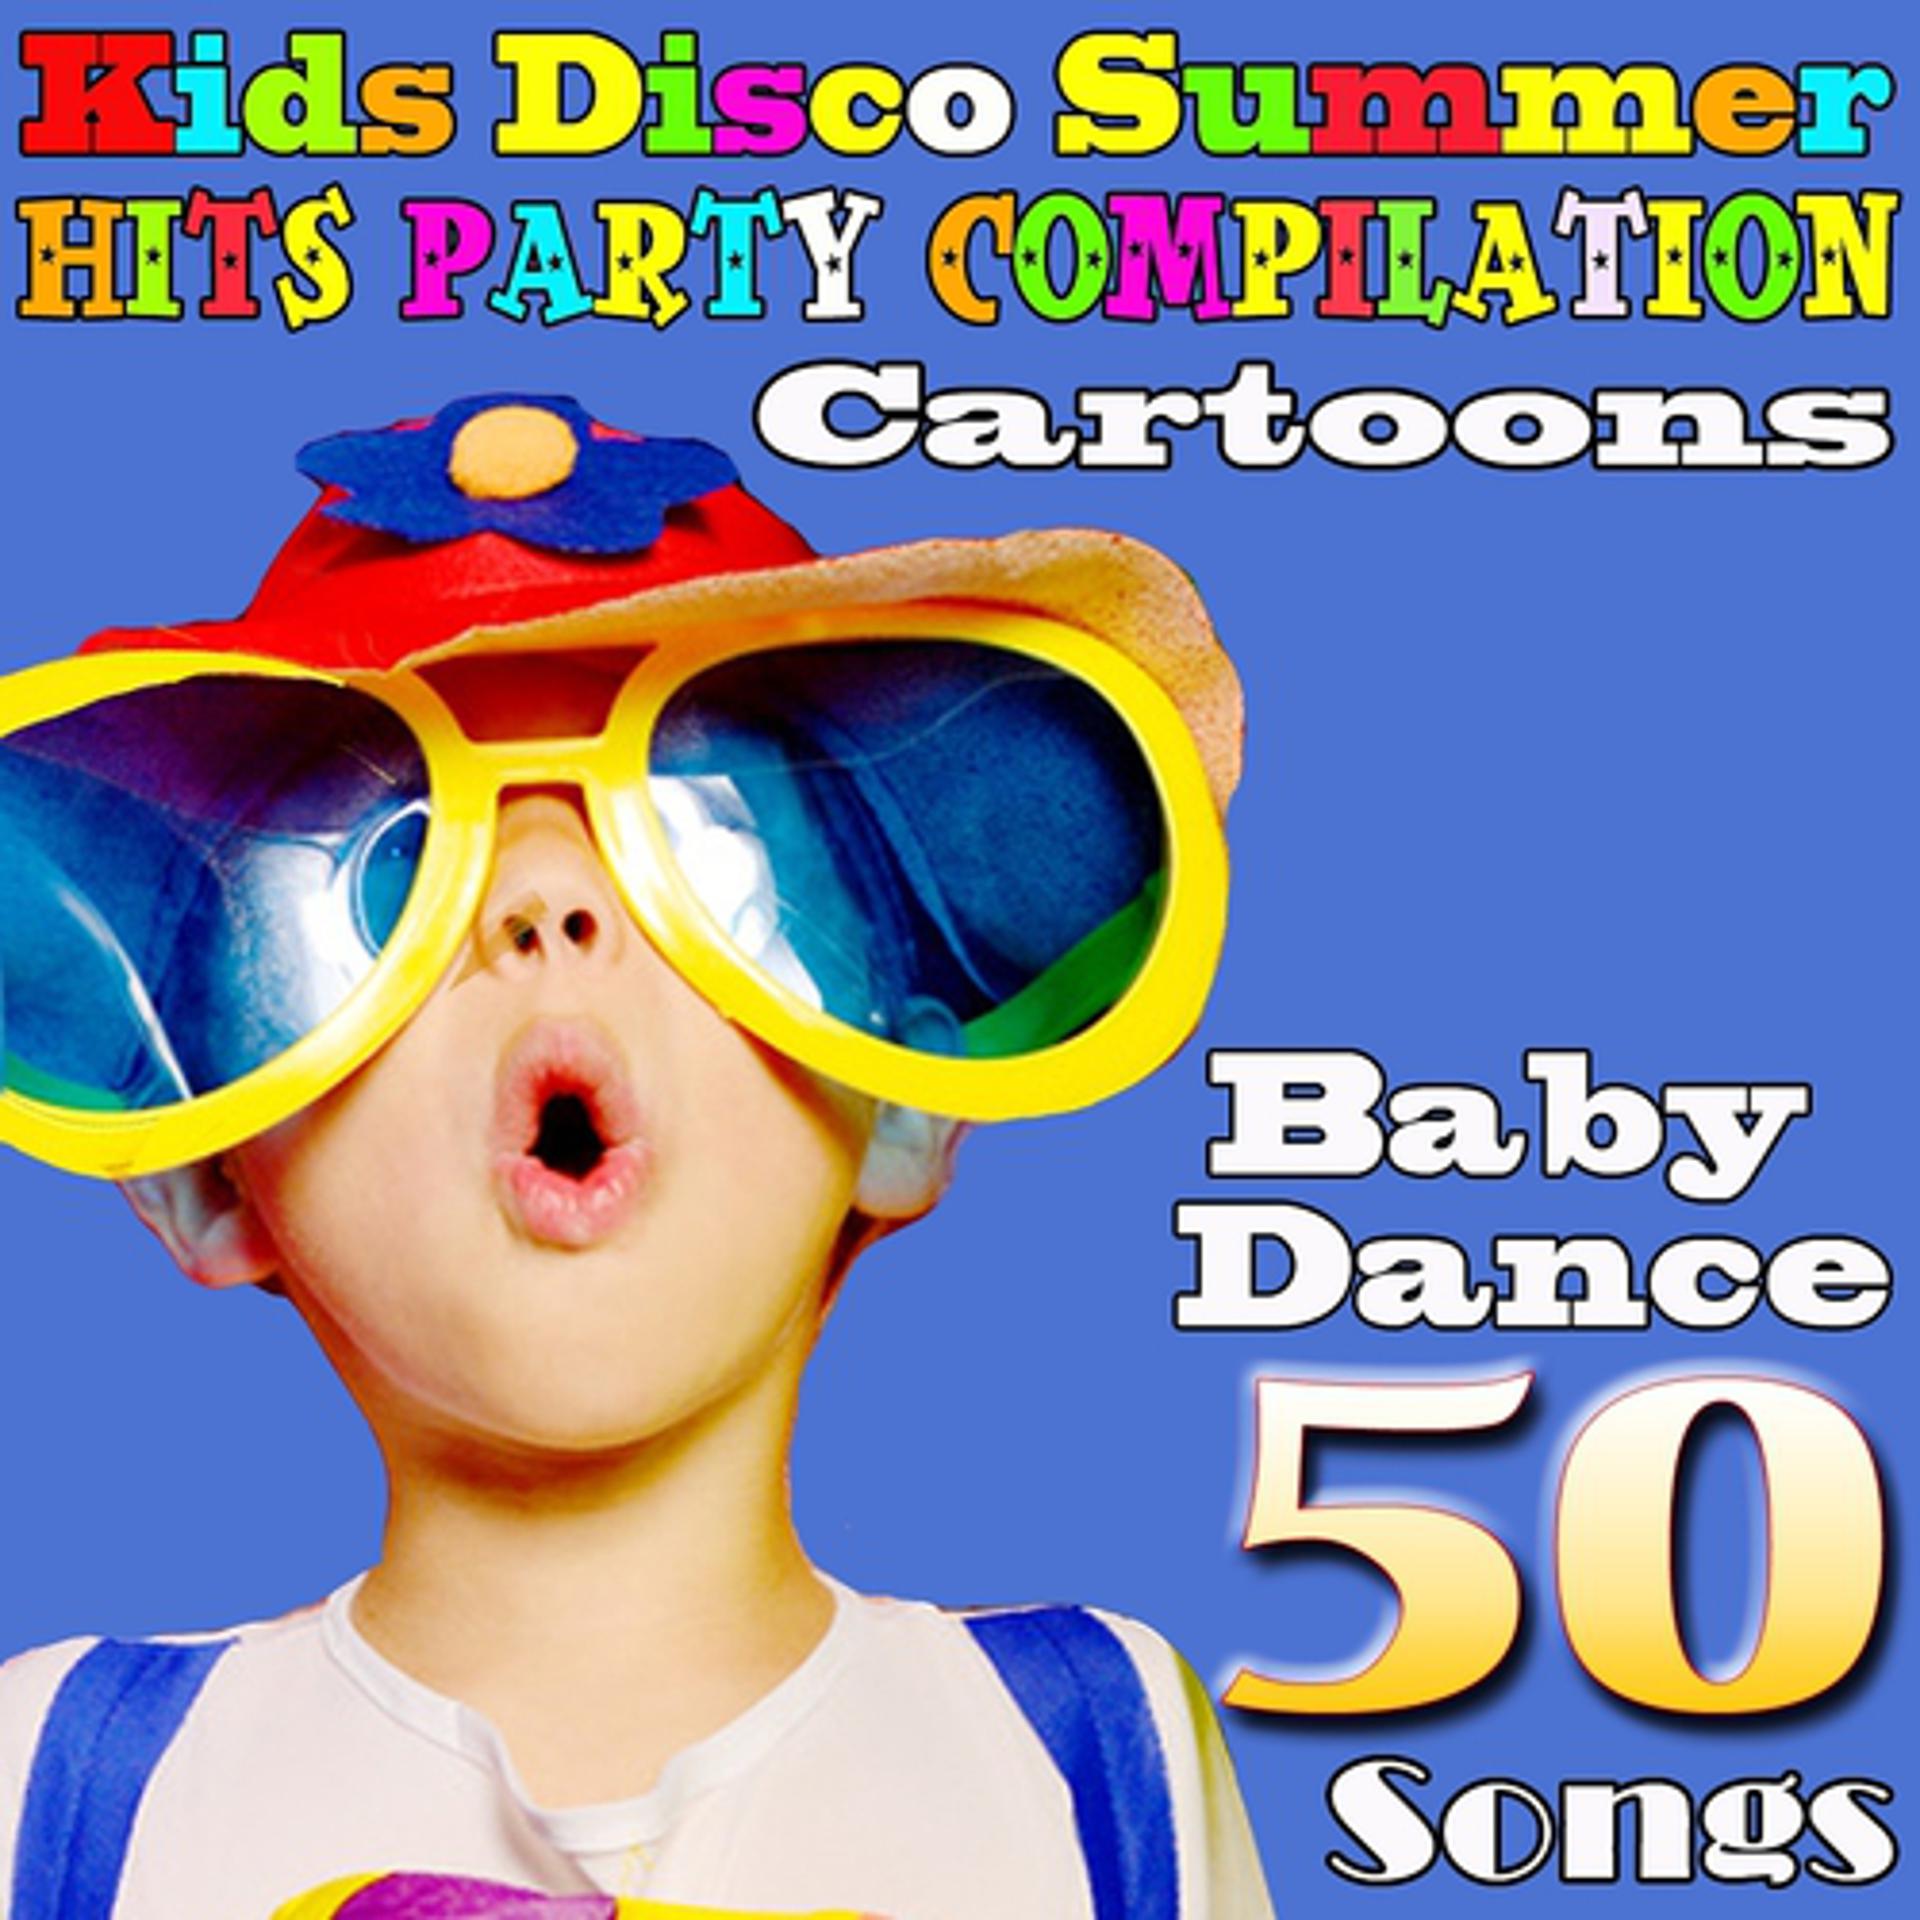 Постер альбома Kids Disco Summer Hits Party Compilation (50 Songs: Cartoons, Baby Dance)